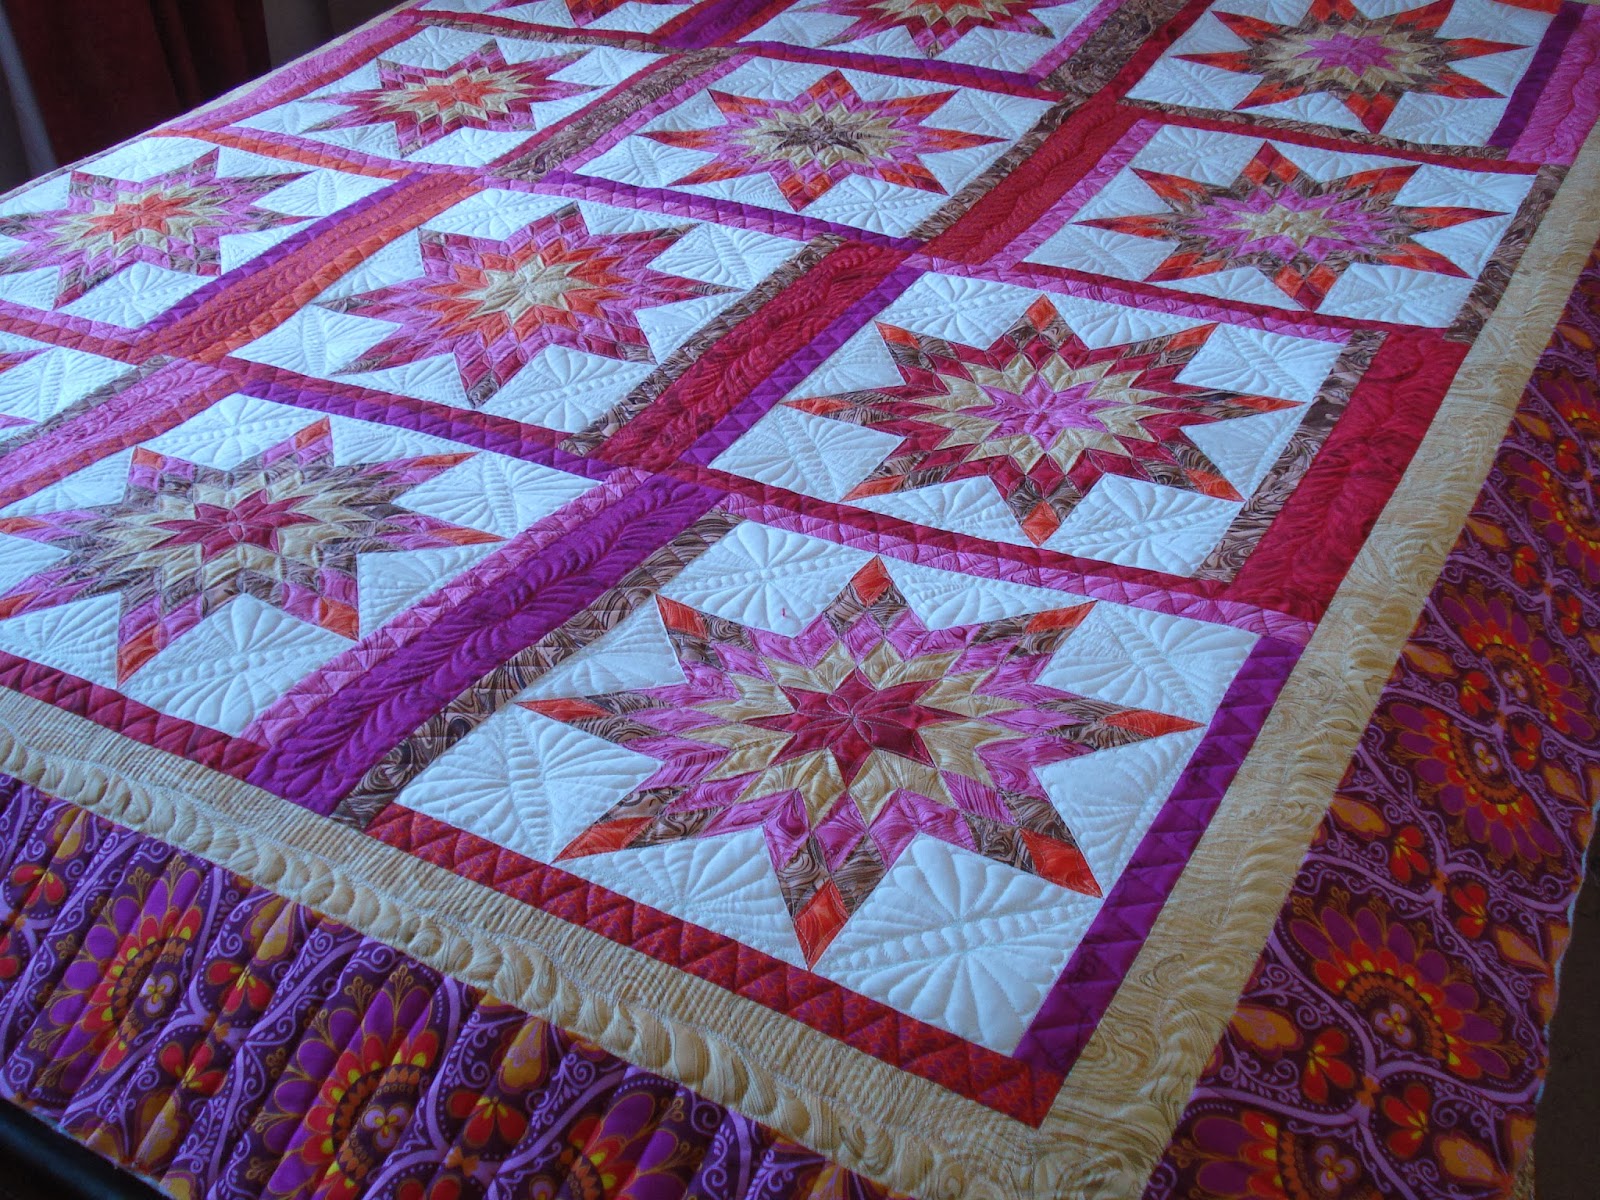 The Nifty Stitcher: Lone Star Quilt Part 2